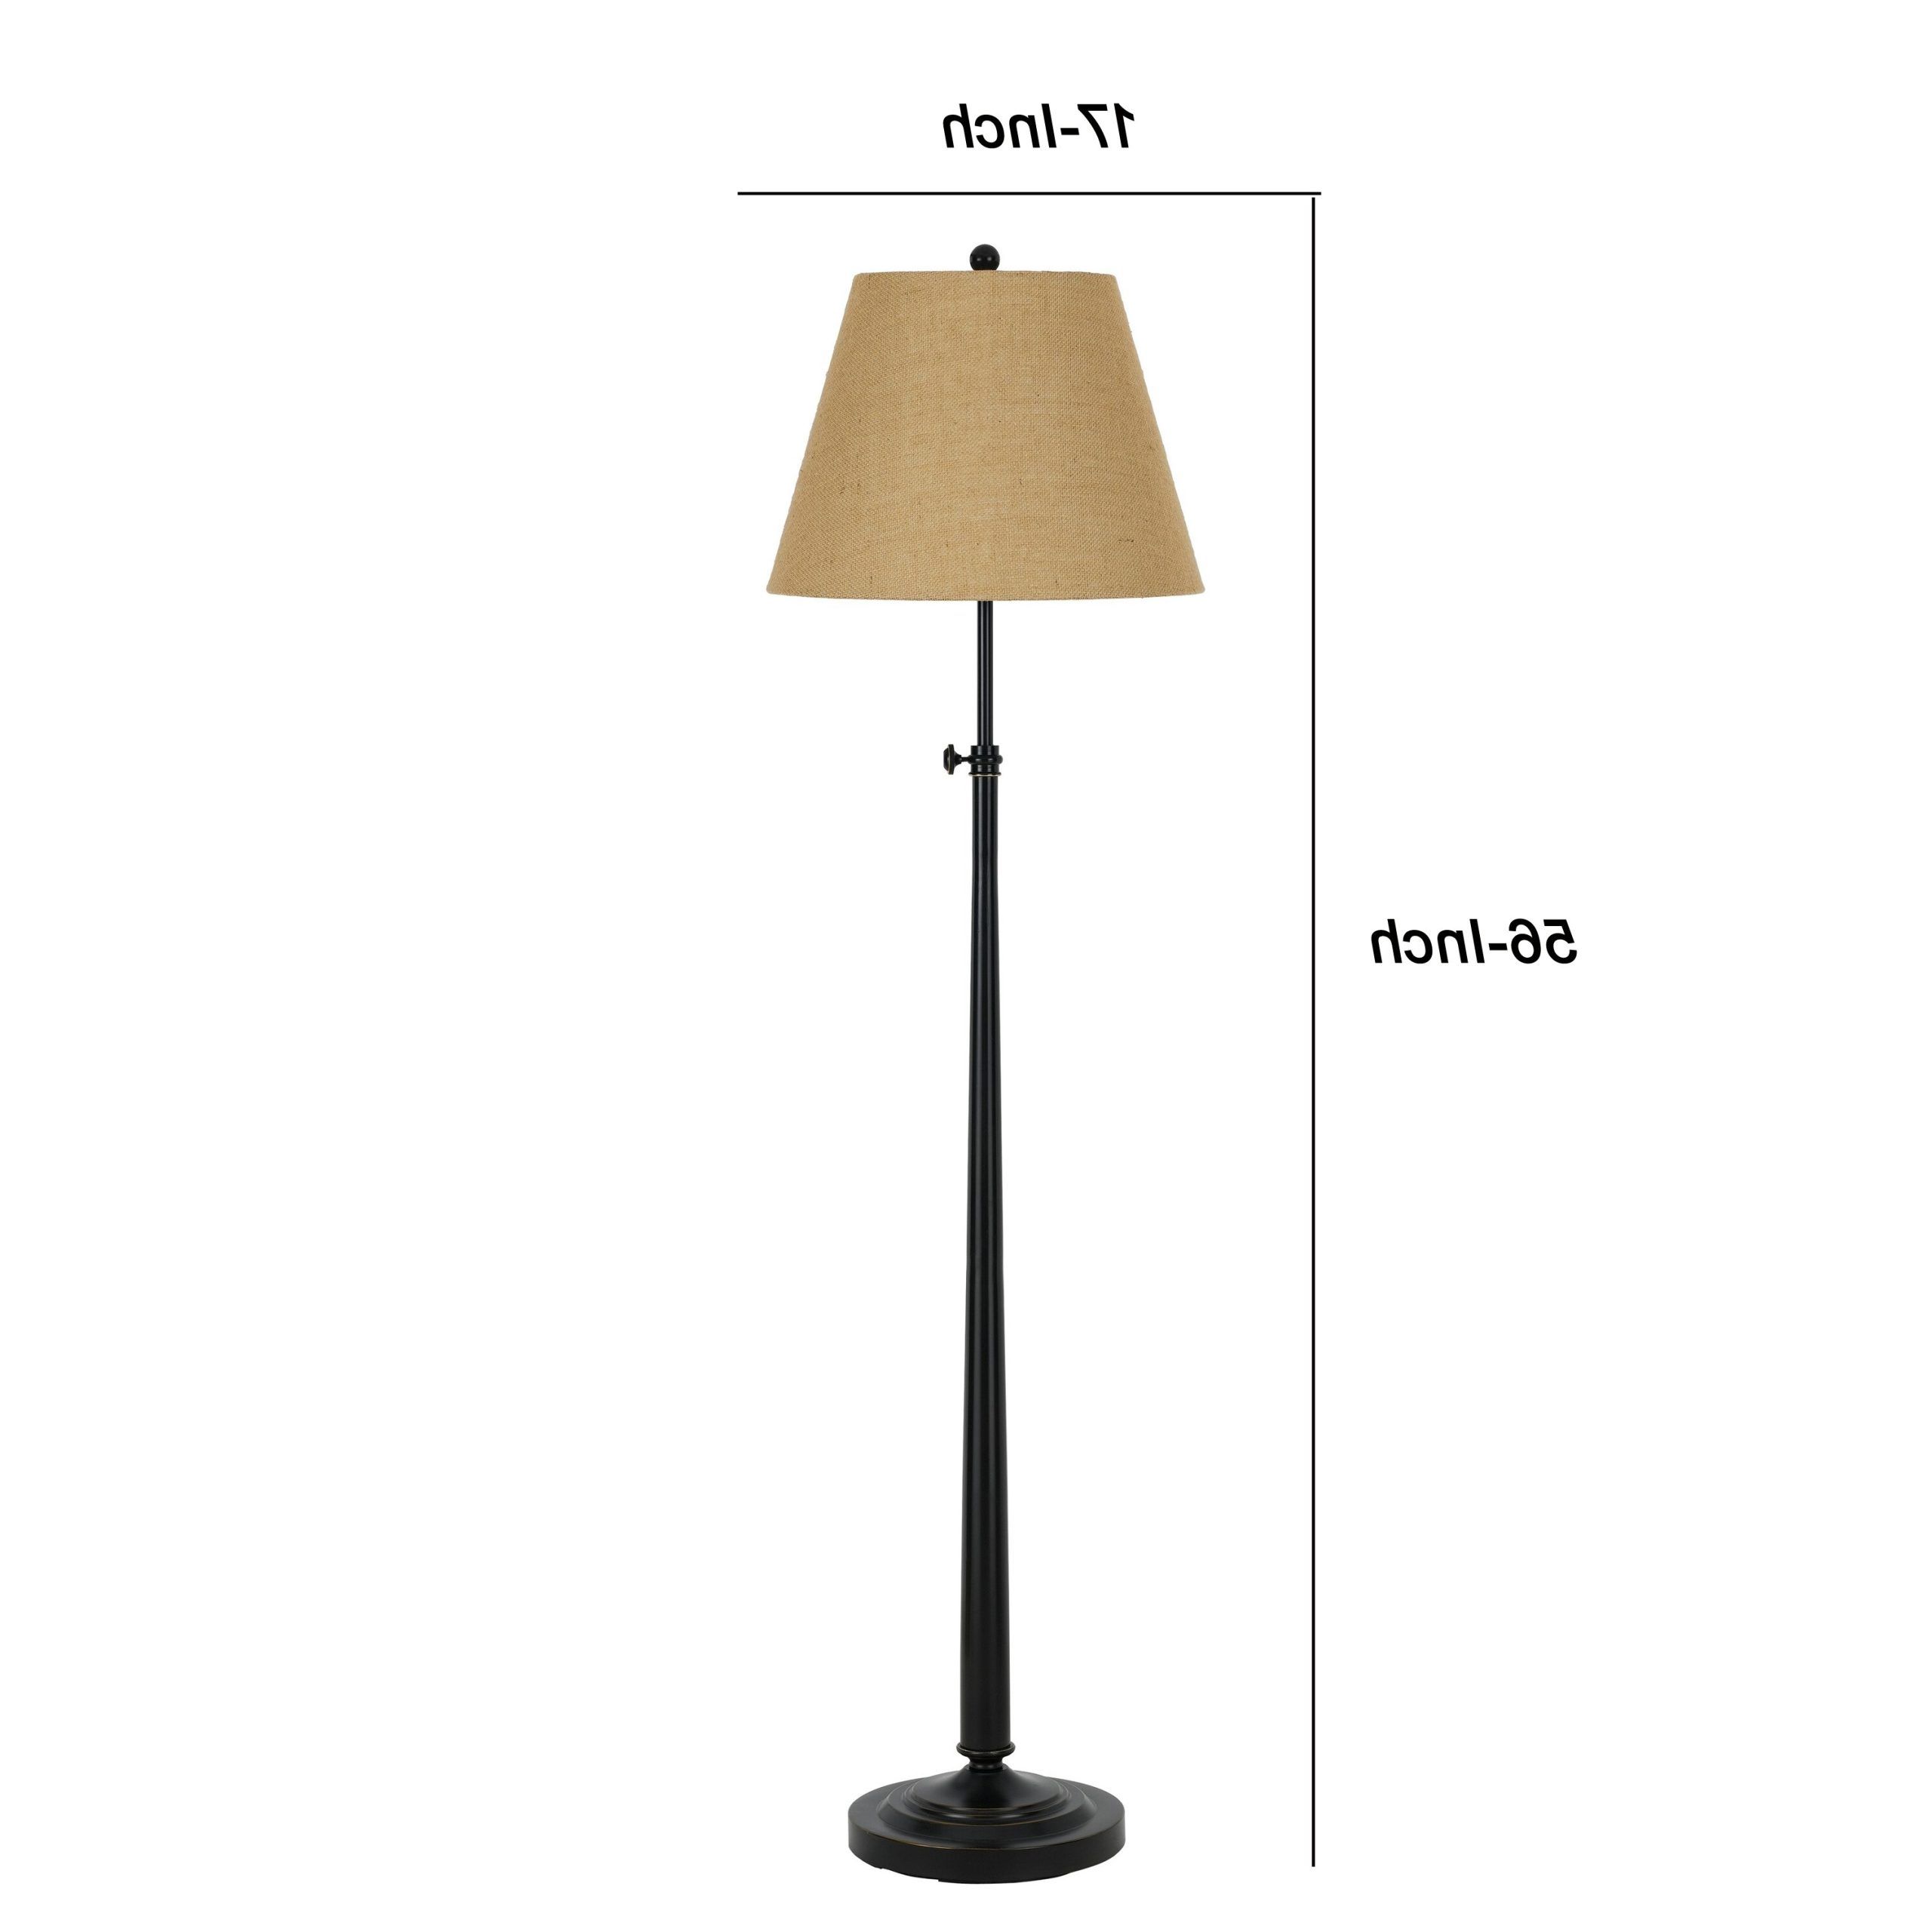 Tubular Metal Floor Lamp With Adjustable Height Mechanism, Black And Beige  – Overstock – 31684397 Intended For Well Known Adjustable Height Standing Lamps (View 10 of 15)